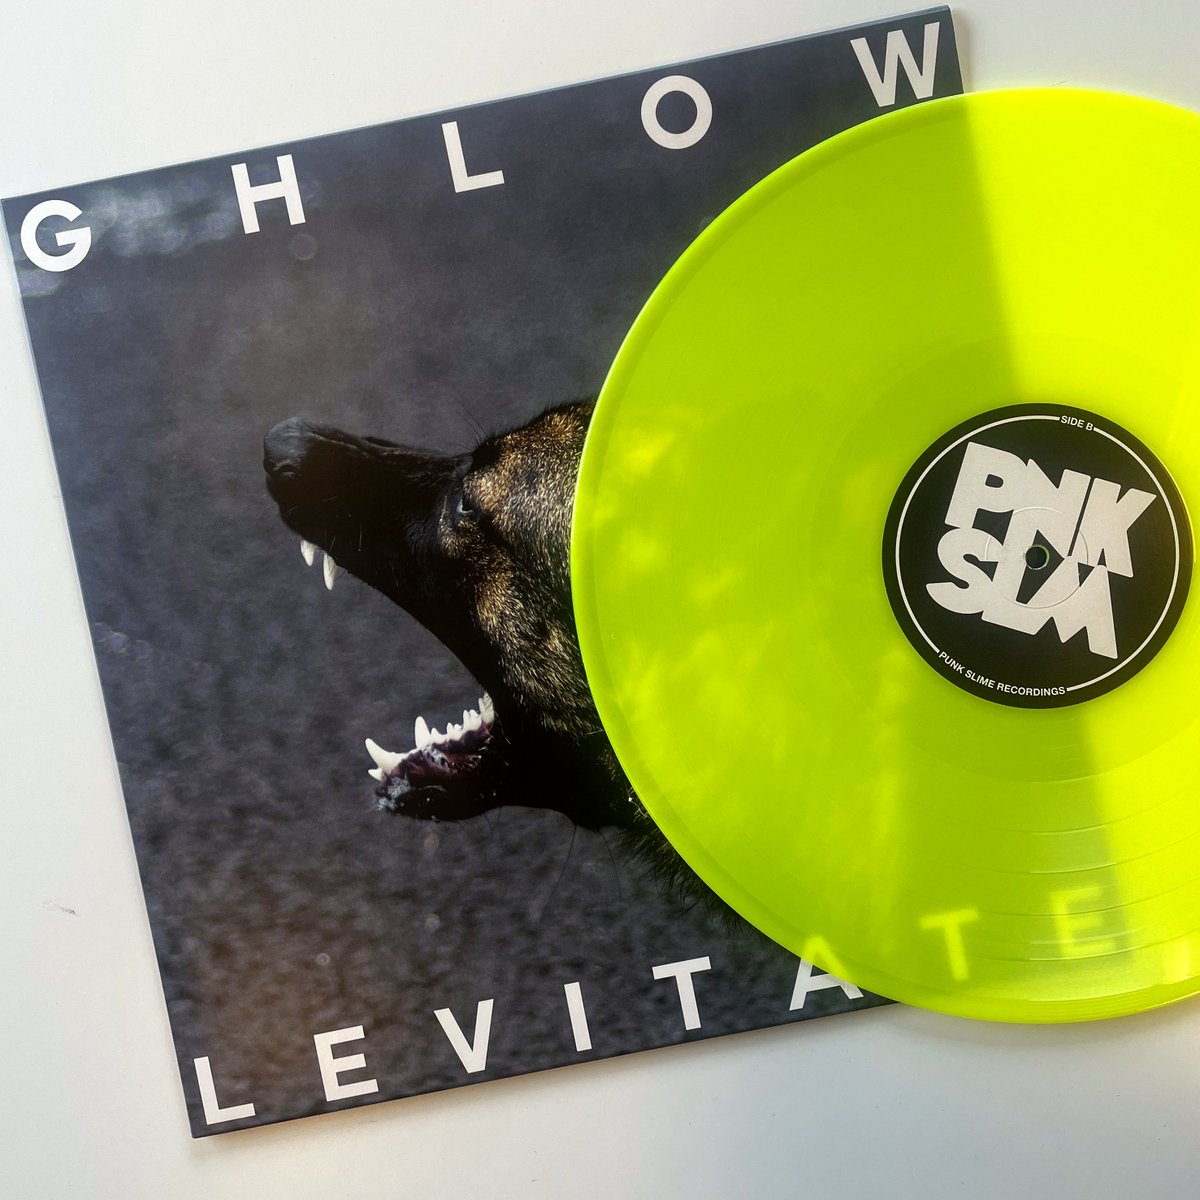 Out this Friday! GHLOW's brilliant second LP Levitate, available on limited PNKSLM exclusive neon yellow vinyl - pre-order yours: PNKSLM.com/store 'motorik punk classic' – NARC. 4/5 'jagged industrial-punk' – FLOOD 'GHLOW are an unstoppable' – God Is In The TV